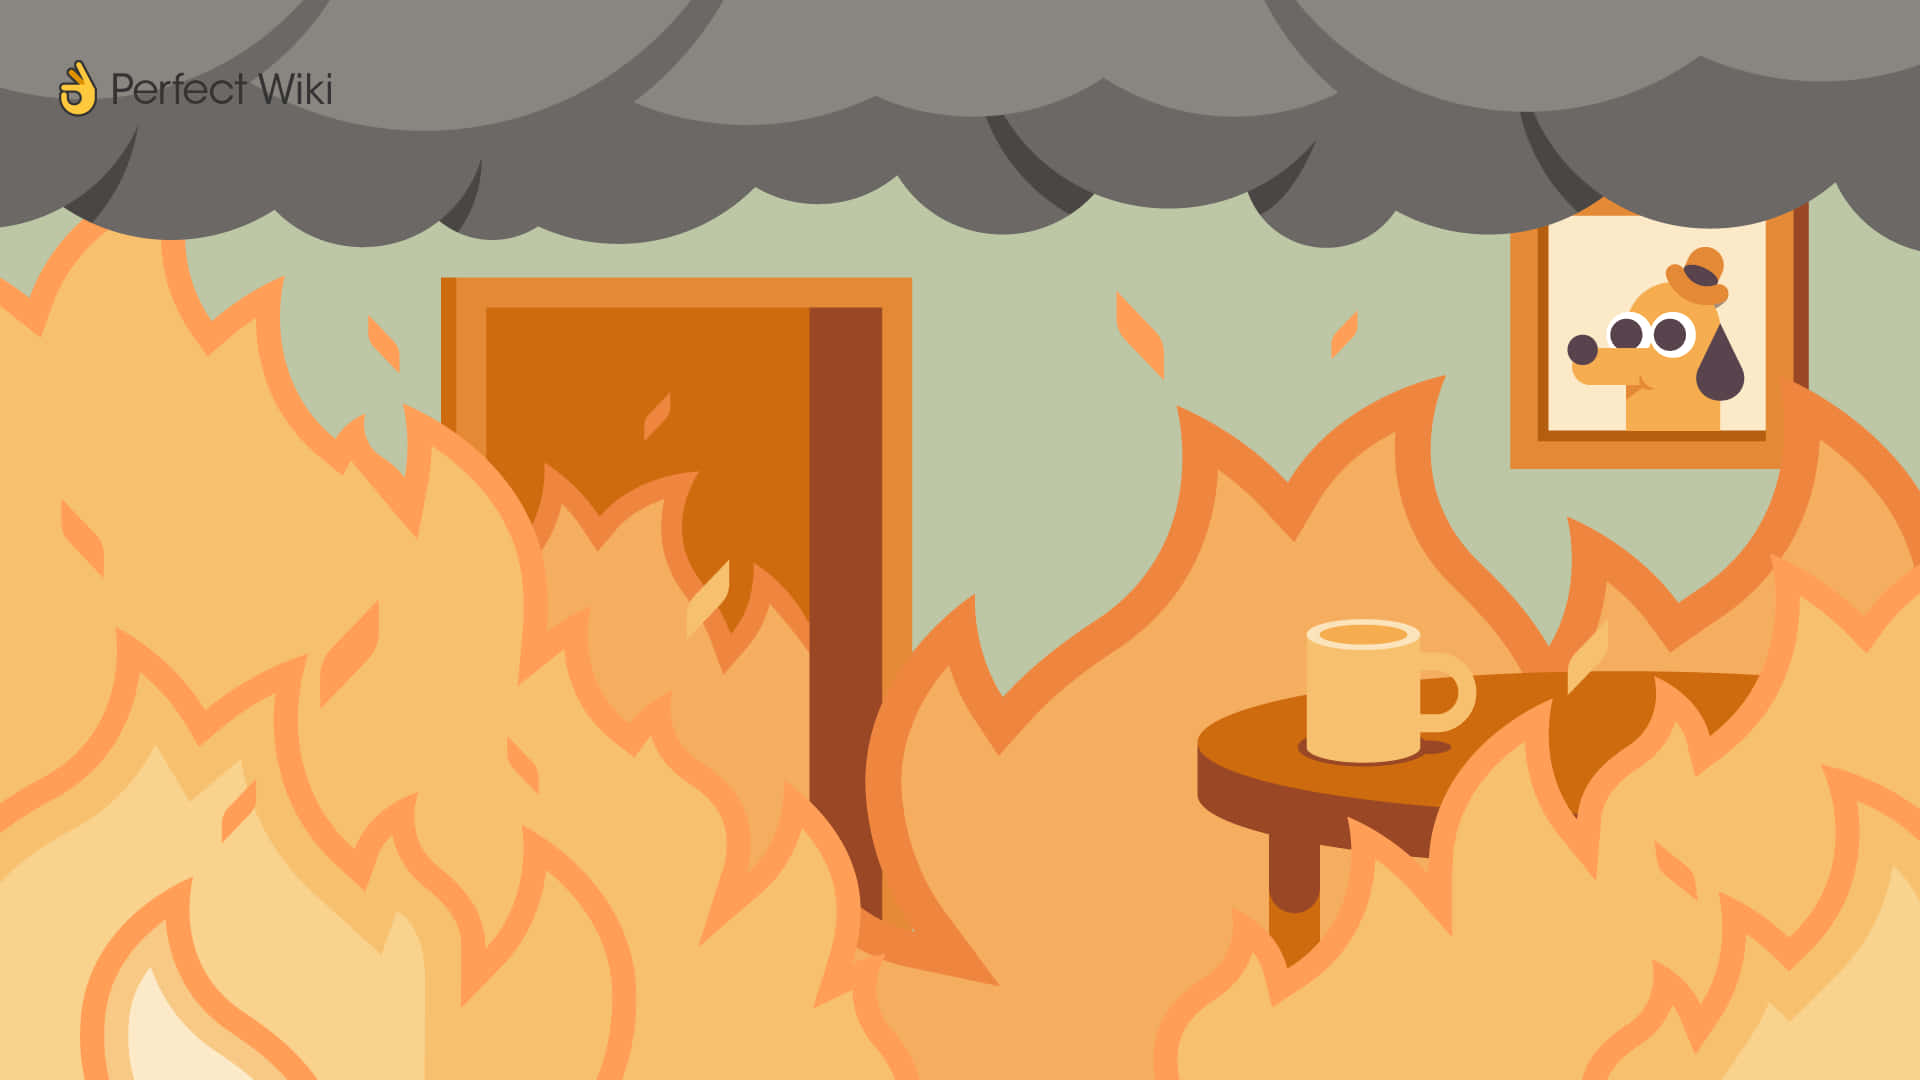 A Cartoon Image Of A Fire In A House